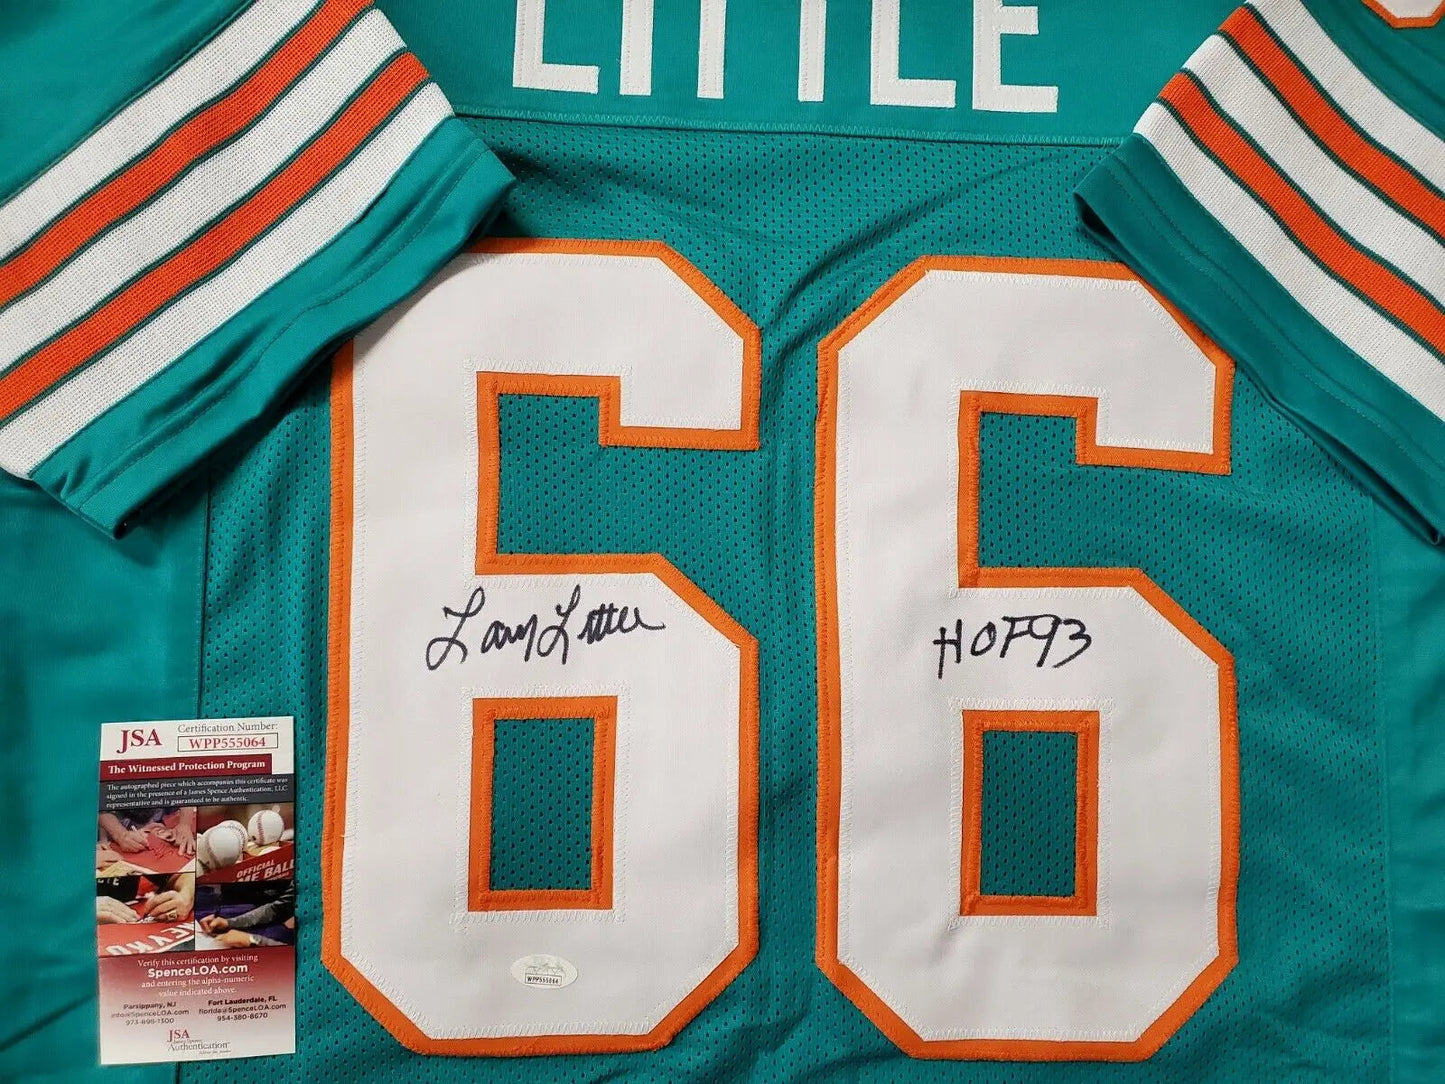 MVP Authentics Larry Little Autographed Signed Inscribed Miami Dolphins Jersey Jsa  Coa 107.10 sports jersey framing , jersey framing